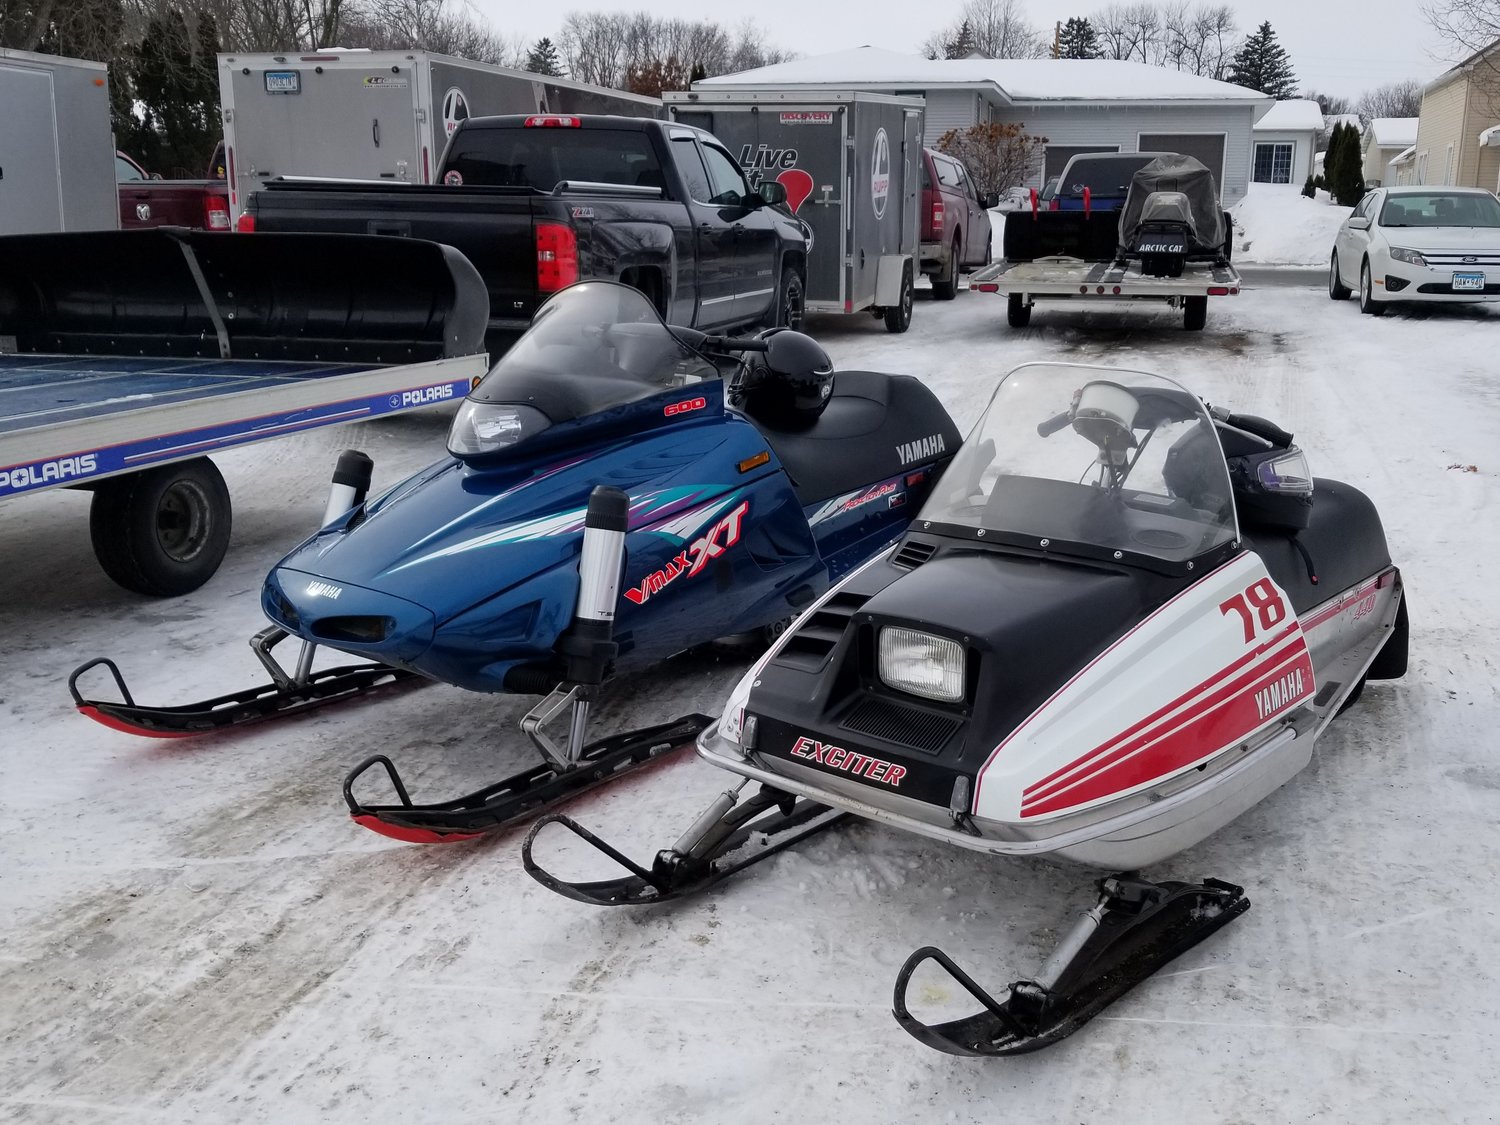 Dan and Denise Reardon made the trip to Goodhue from Delano, MN to ride these Yamaha sleds on the trails to Bellechester.  This was the first time they participated in the ride and the first time they had ever been to Goodhue and Bellechester.